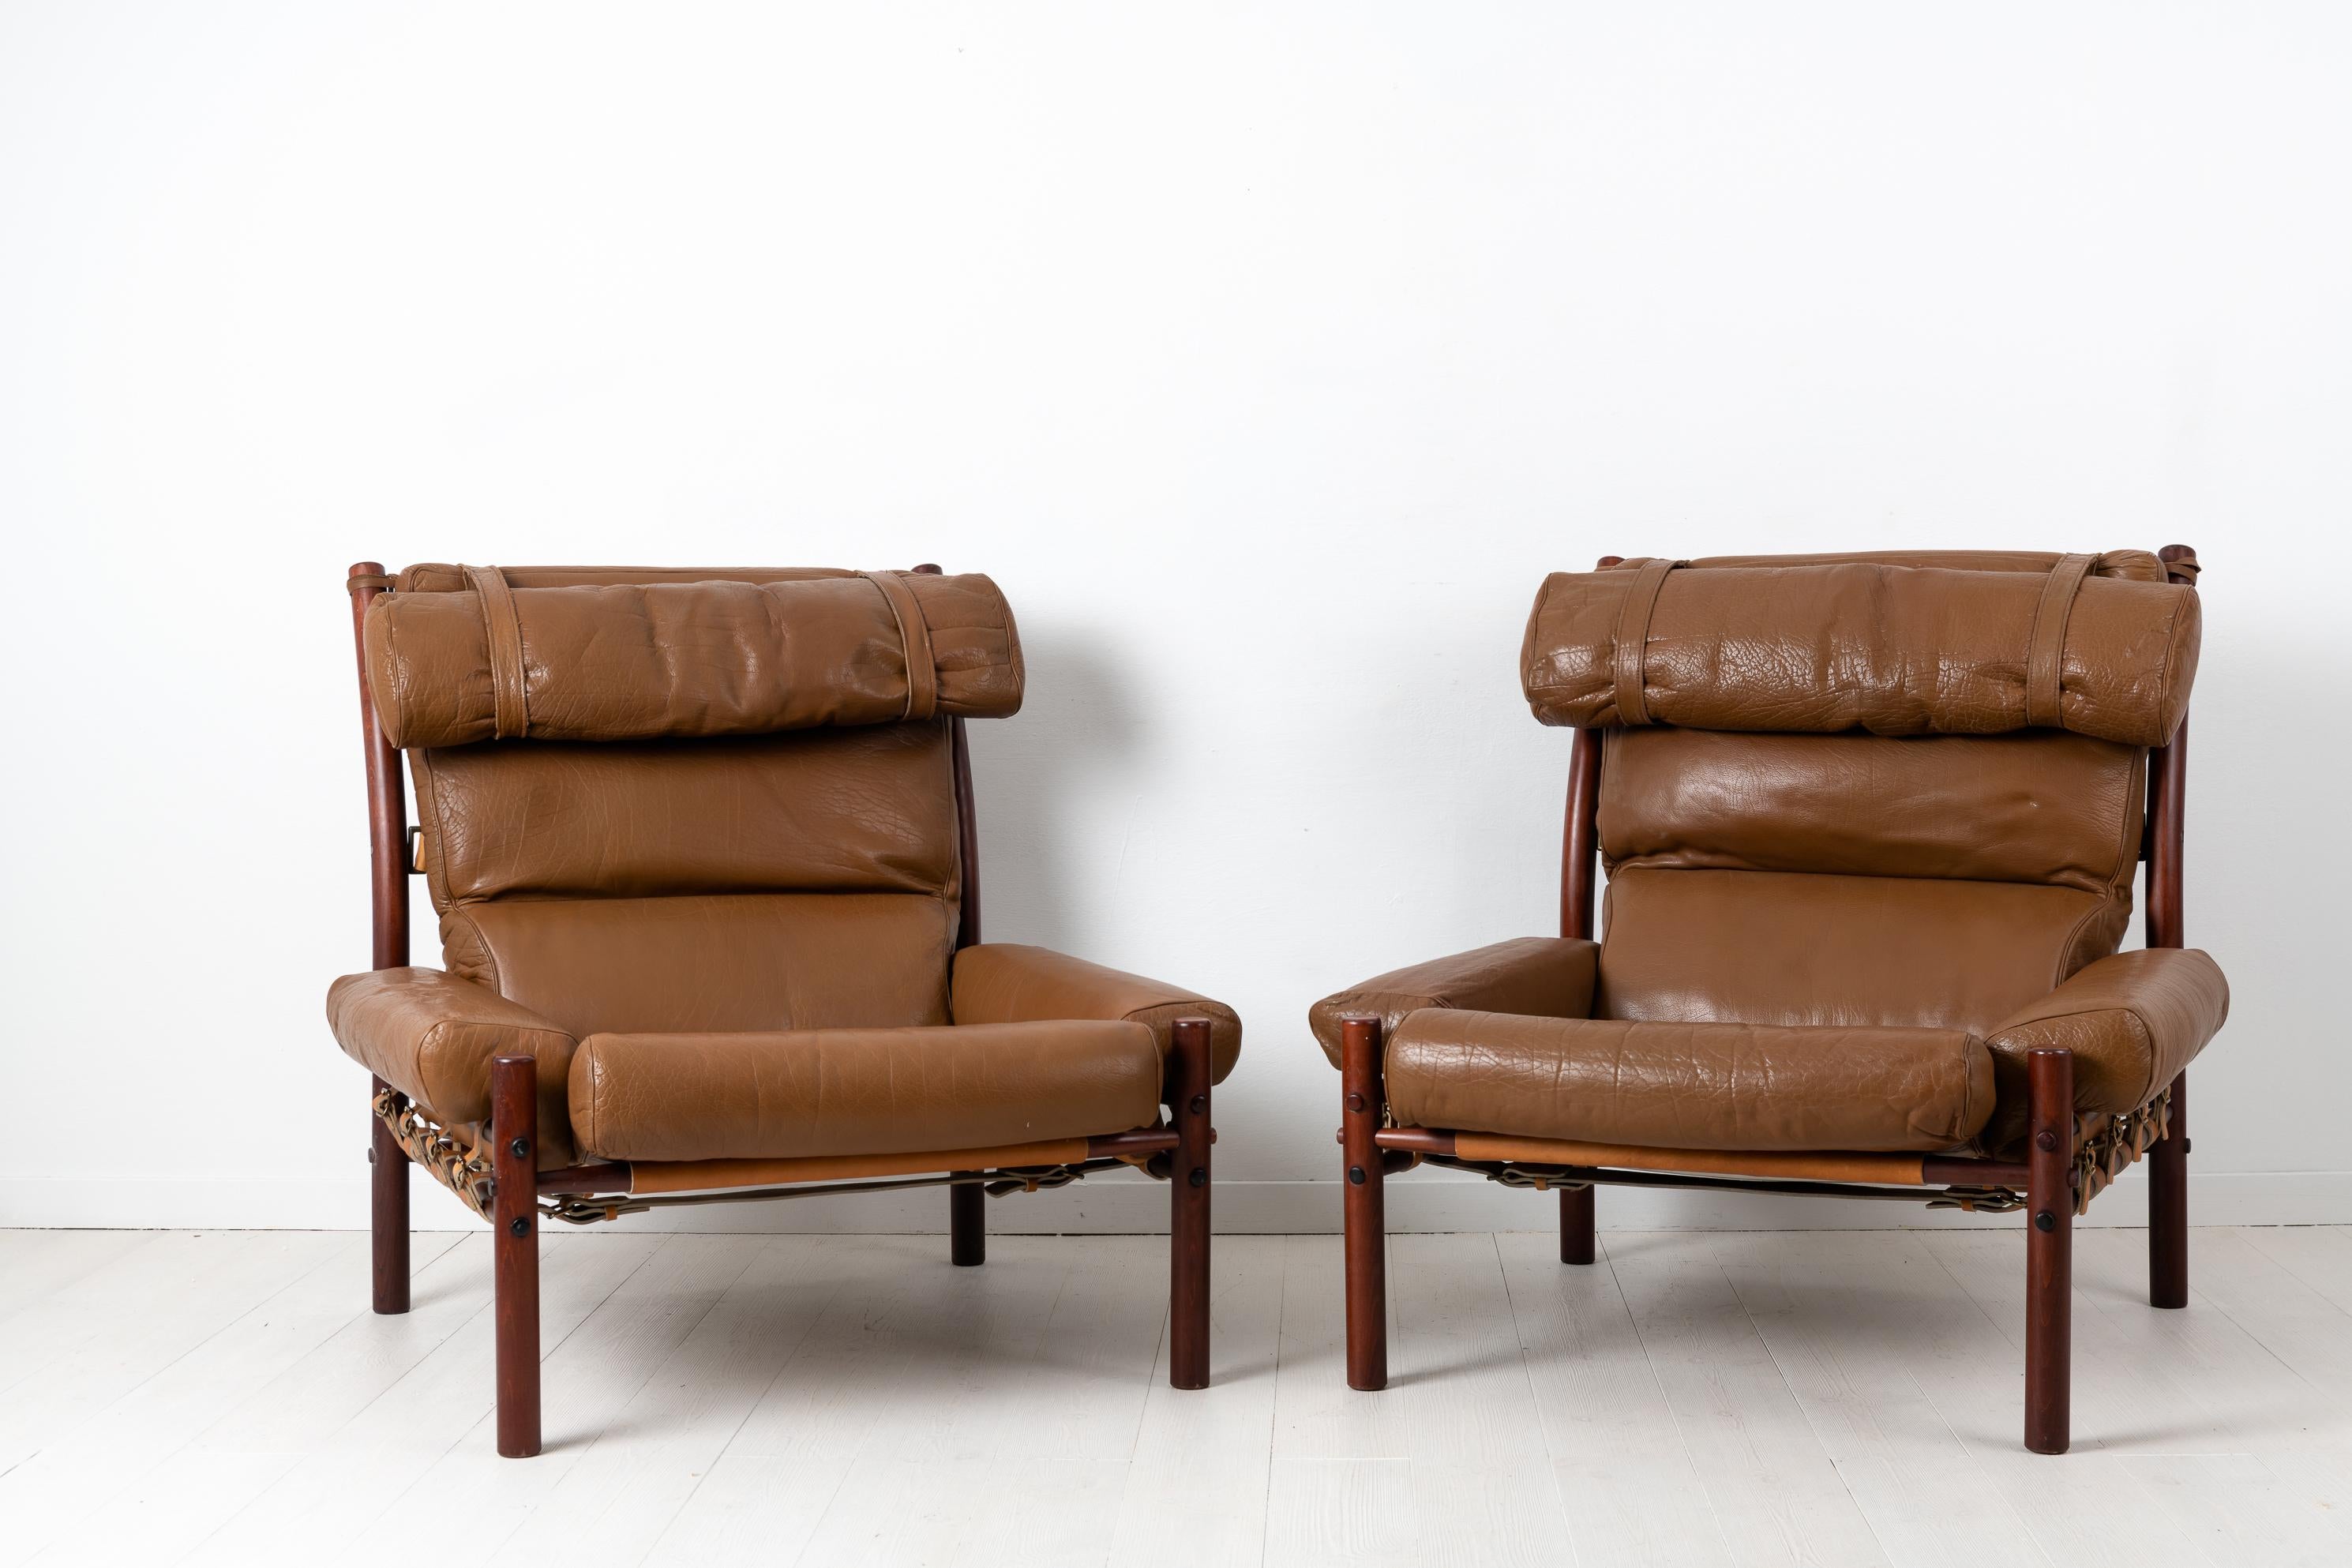 Pair of Inca armchairs by Arne Norell designed 1971. The pair of armchairs have upholstery in buffalo leather and frames made from birch. Manufactured by Norell Möbler during the 1970s. The frames are held together with only strong leather straps,